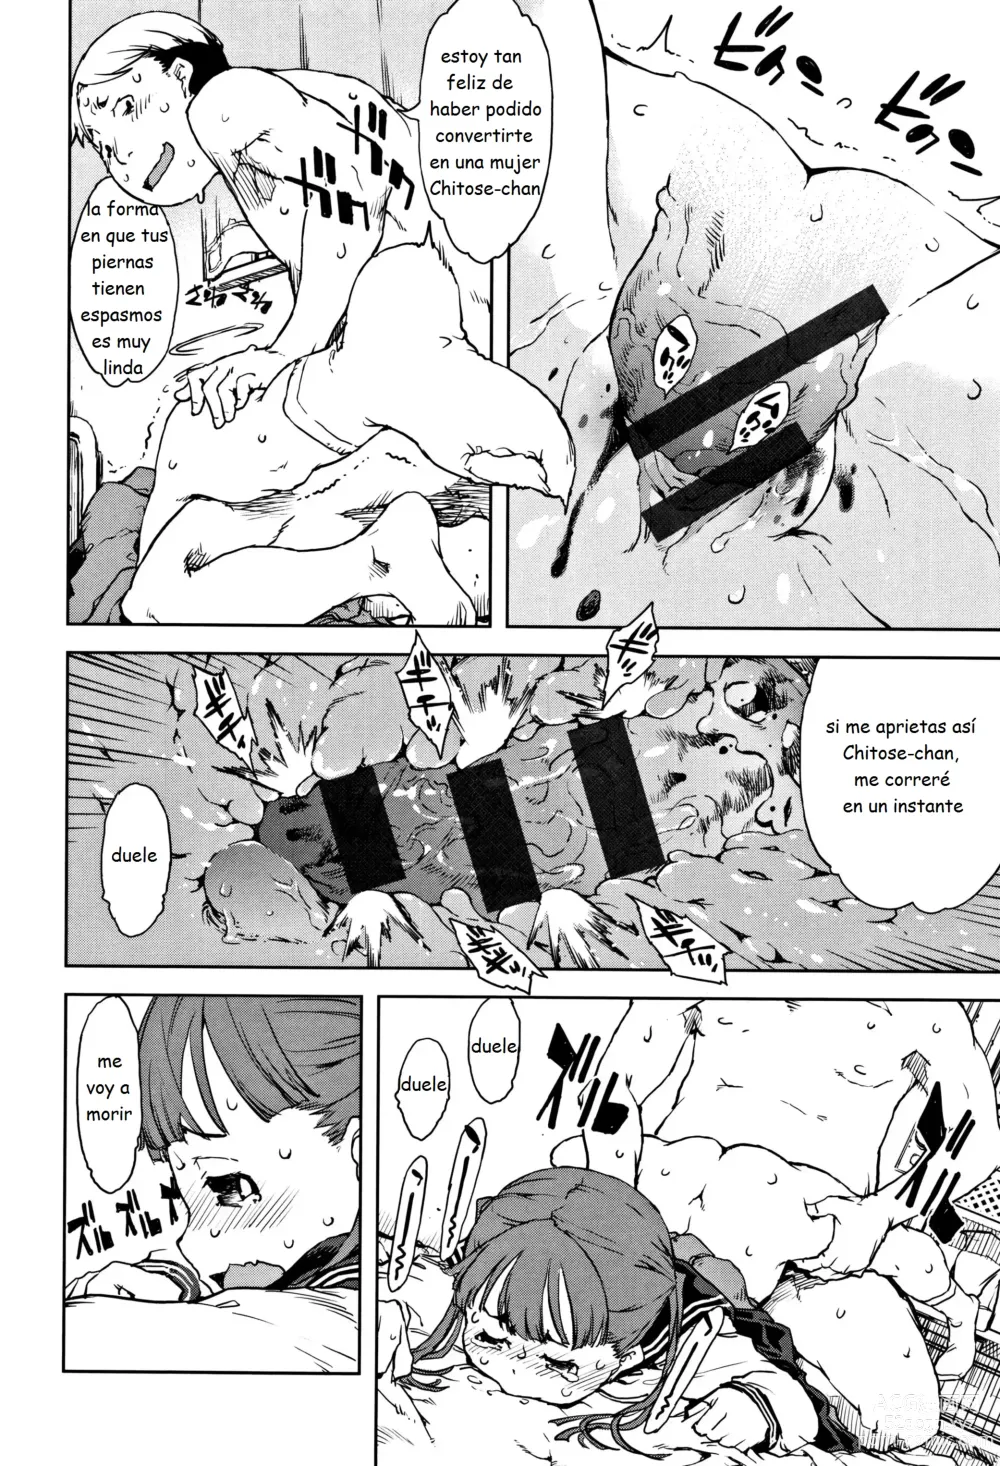 Page 14 of doujinshi Seconds please Chitose-chan